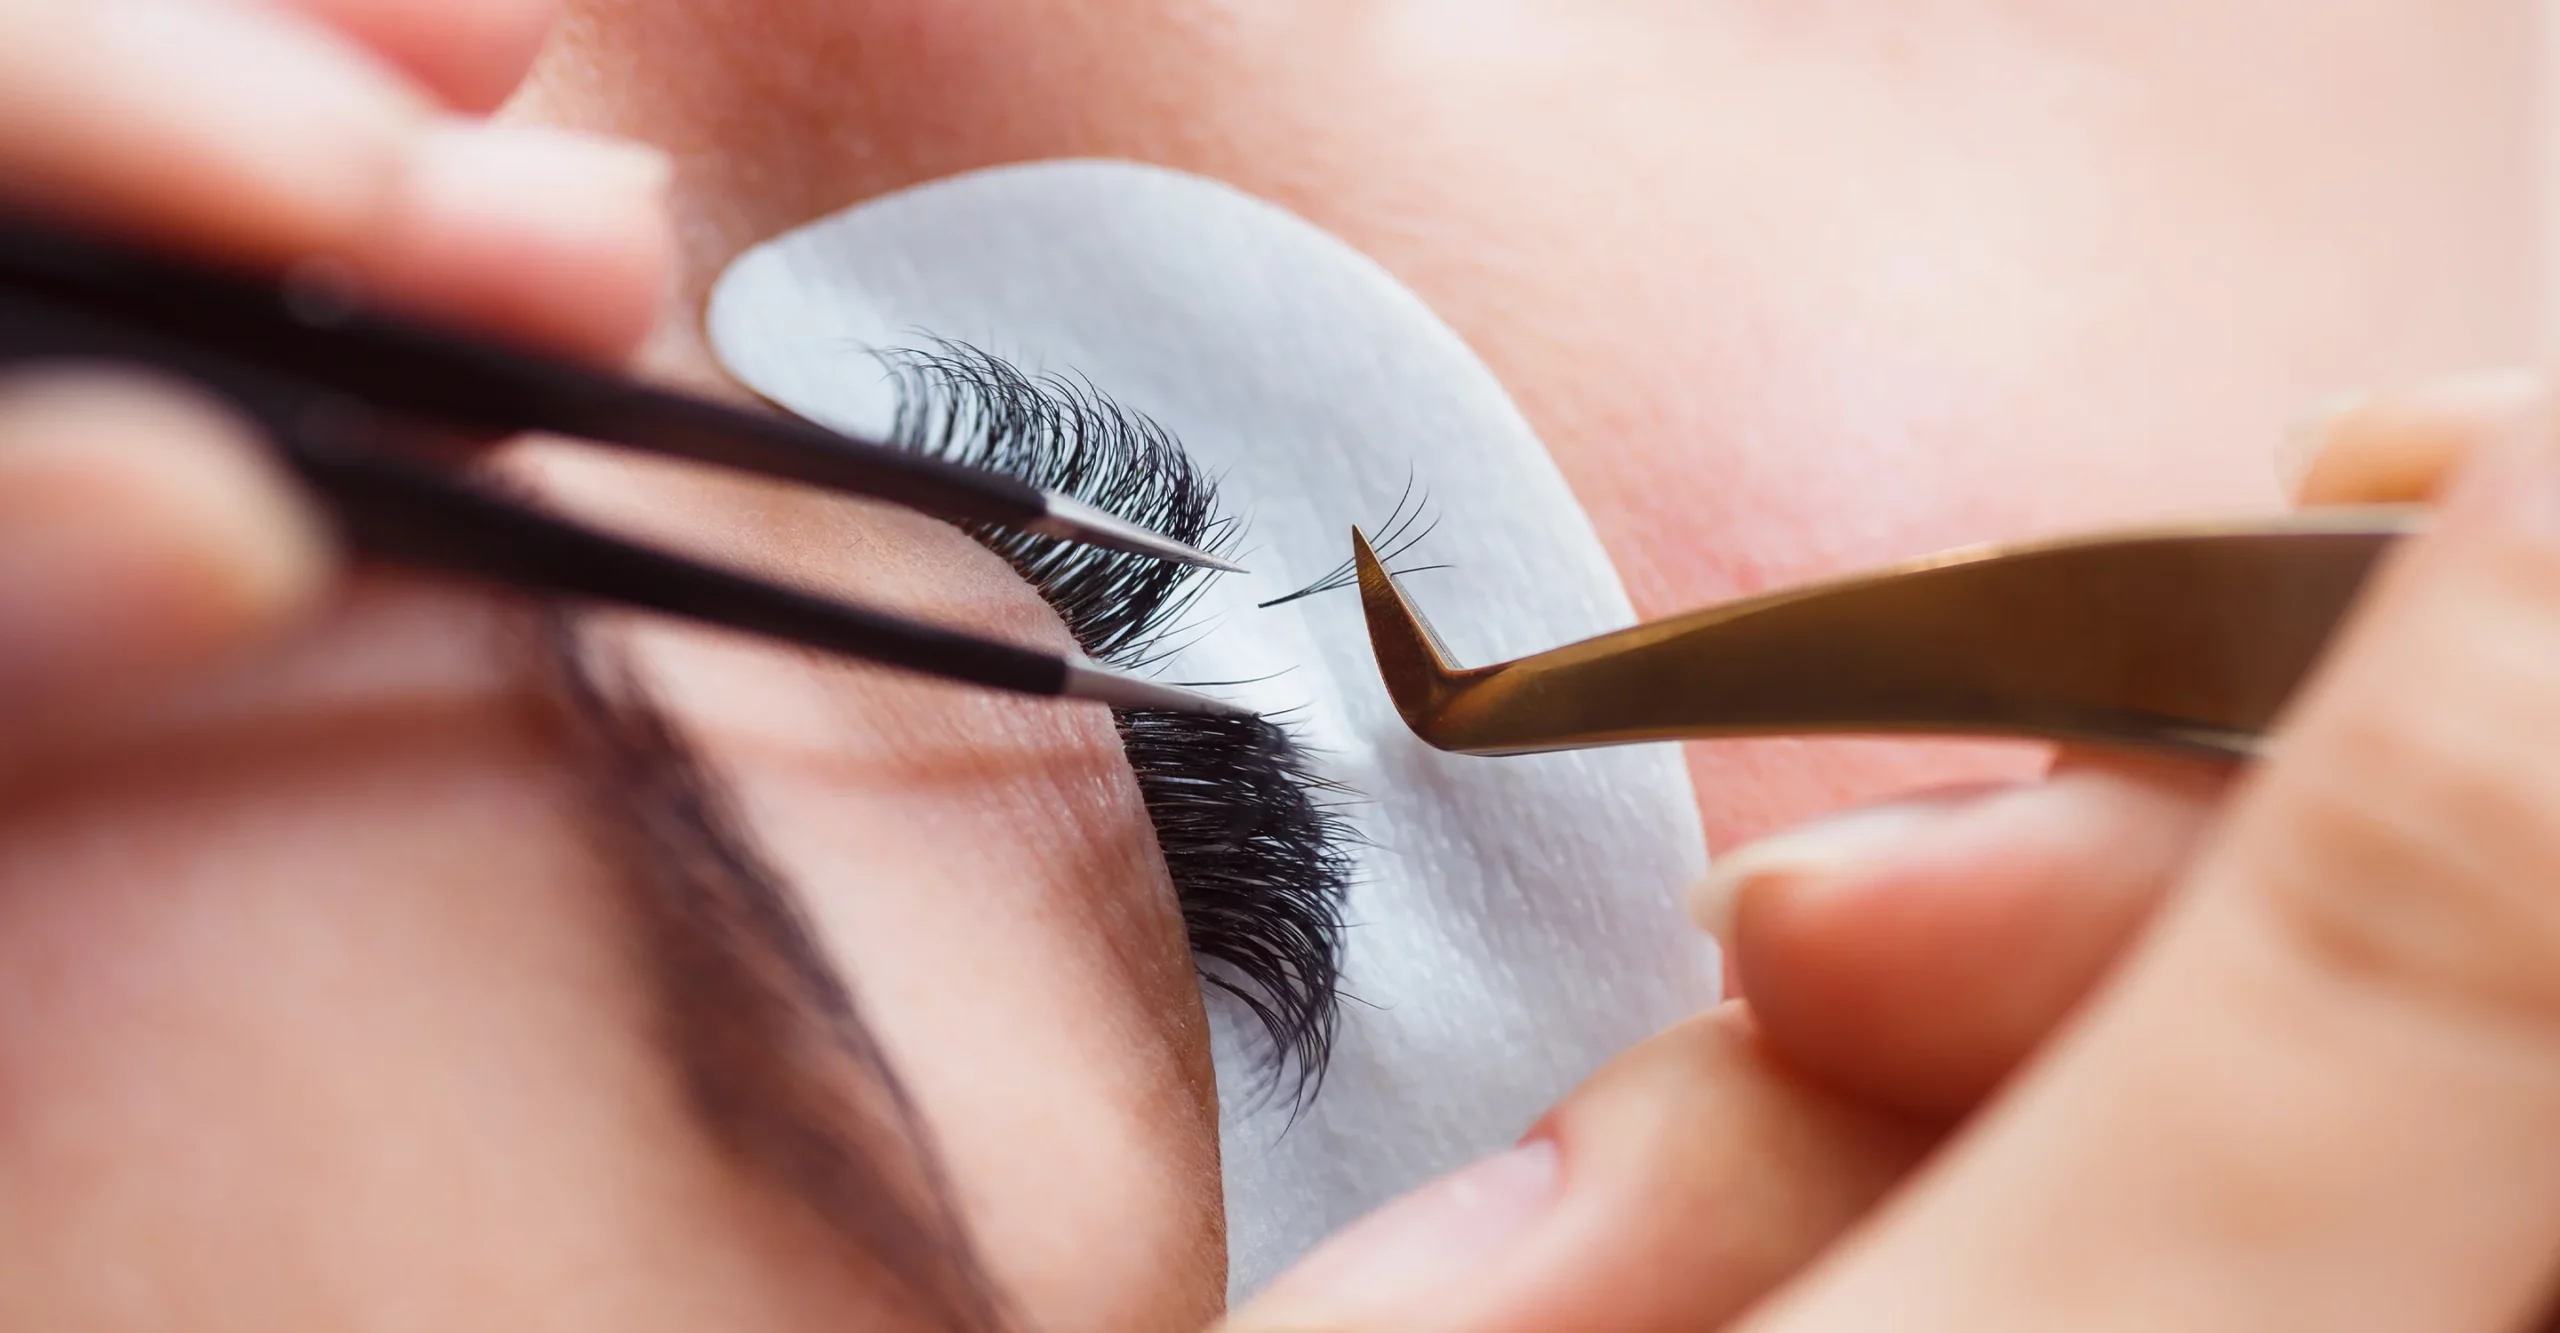 A lash technician uses tweezers to apply lash extensions to a client’s natural lashes.